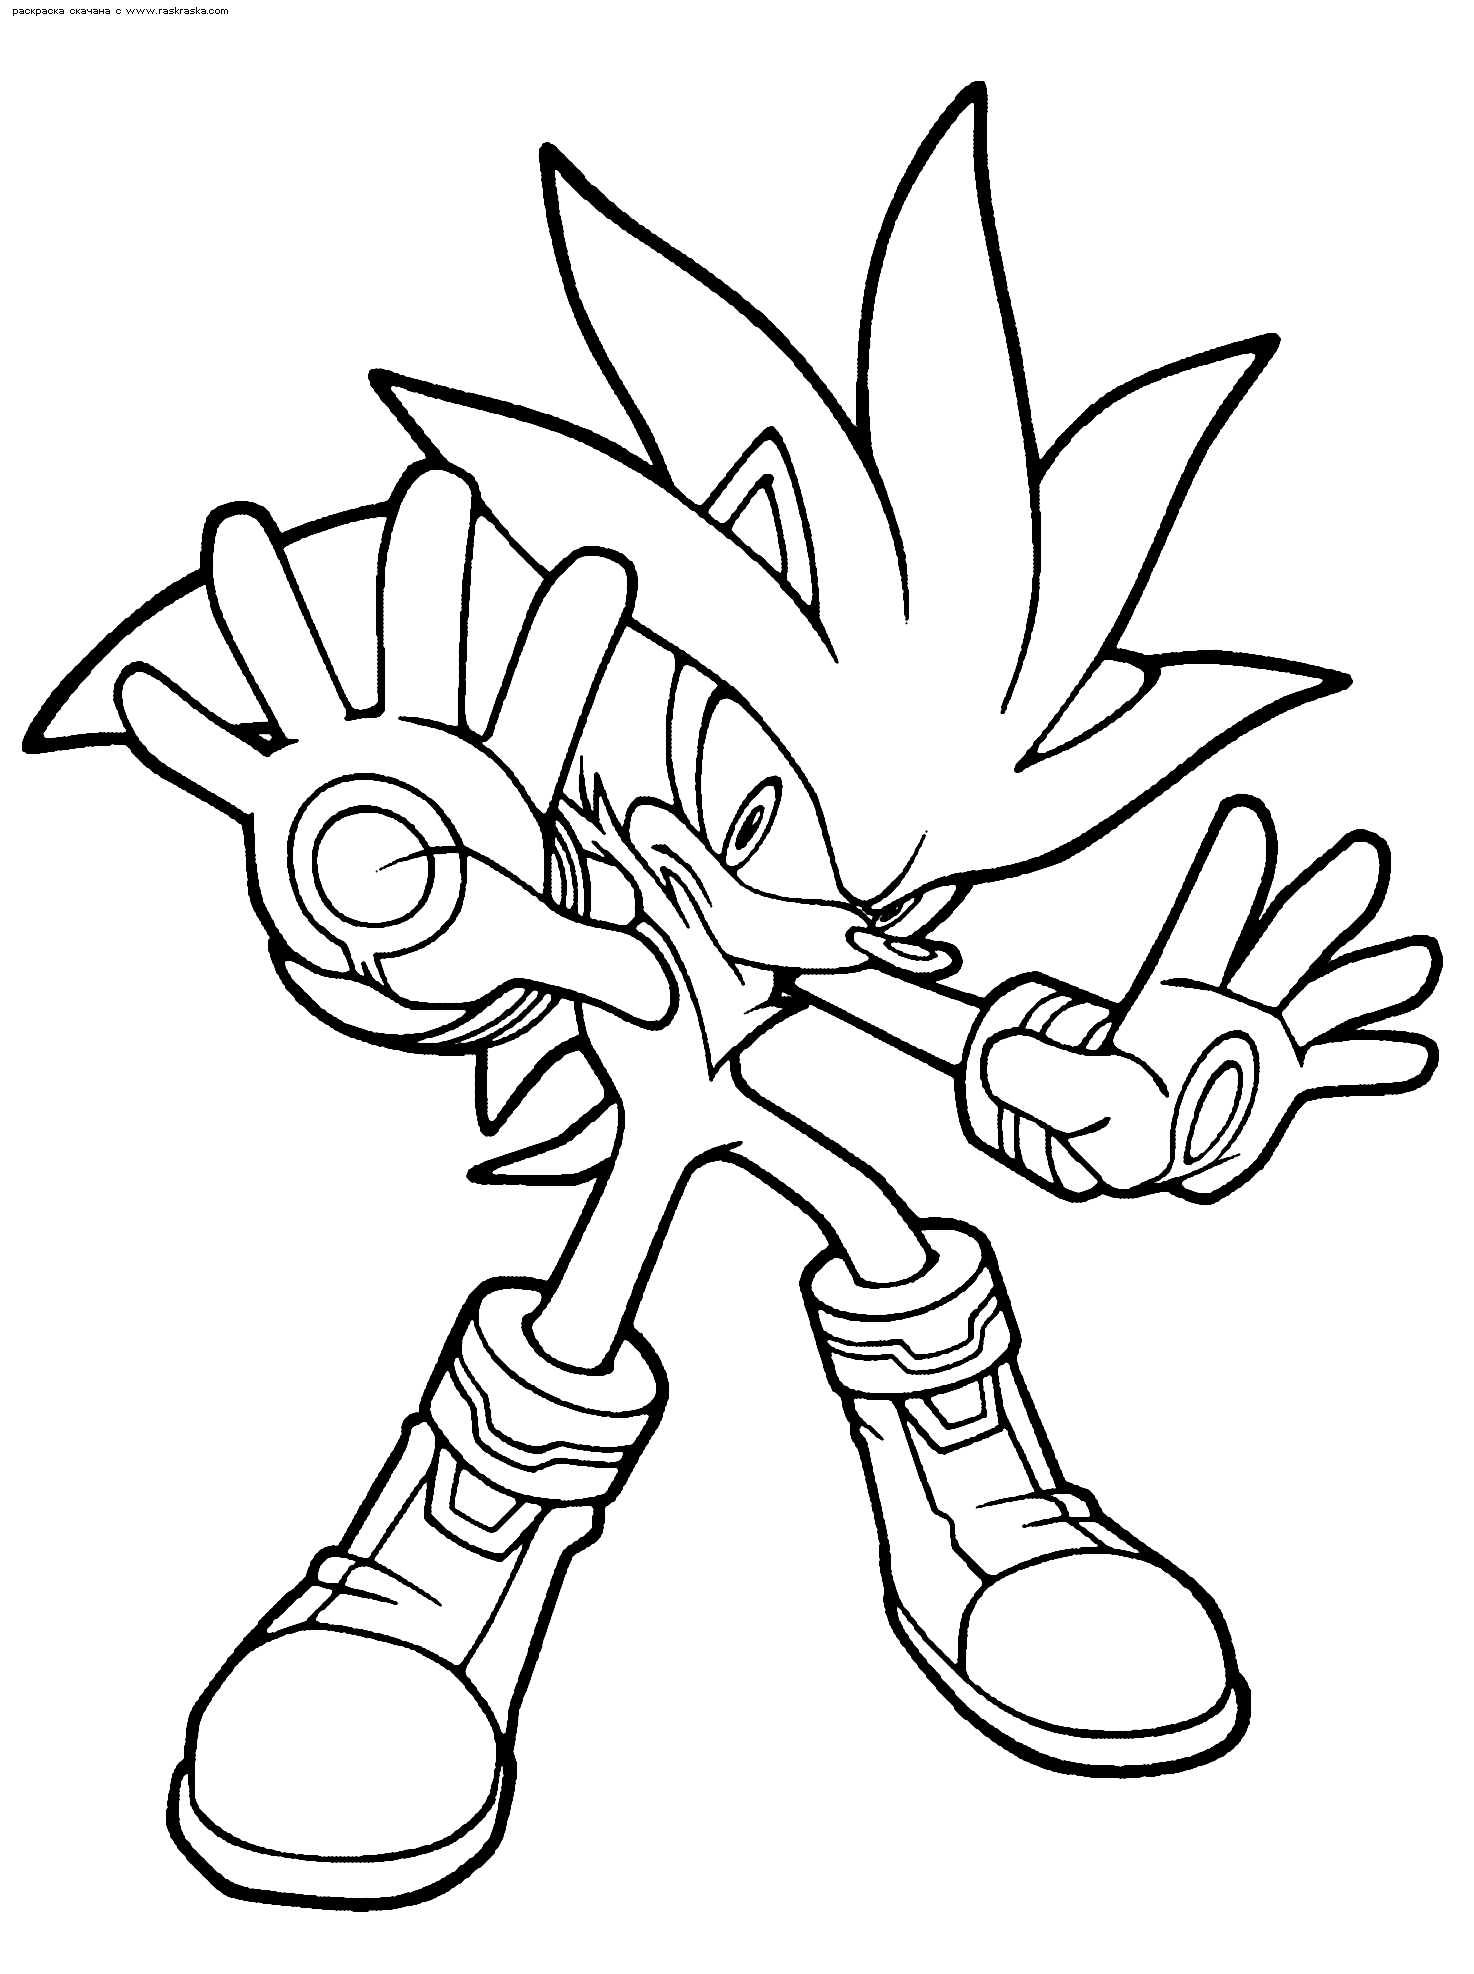 Sonic Coloring in Pages 1